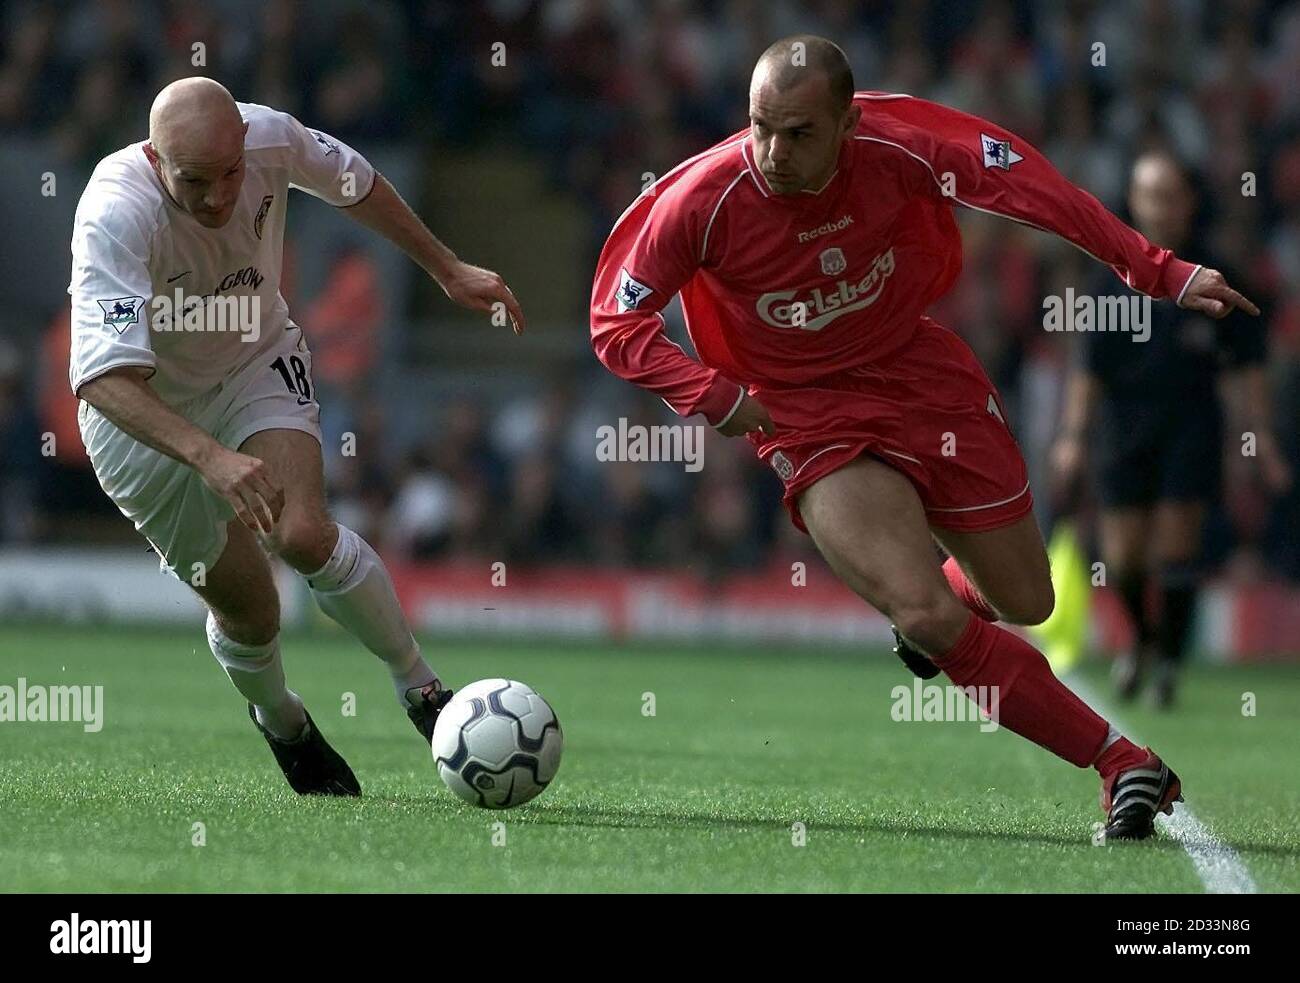 Leeds United's defender Danny Mills (left) trys to keep up with Liverpool's Danny Murphy during the FA Barclaycard Premiership game at Anfield, Liverpool. THIS PICTURE CAN ONLY BE USED WITHIN THE CONTEXT OF AN EDITORIAL FEATURE. NO WEBSITE/INTERNET USE OF PREMIERSHIP MATERIAL UNLESS SITE IS REGISTERED WITH FOOTBALL ASSOCIATION PREMIER LEAGUE. Stock Photo